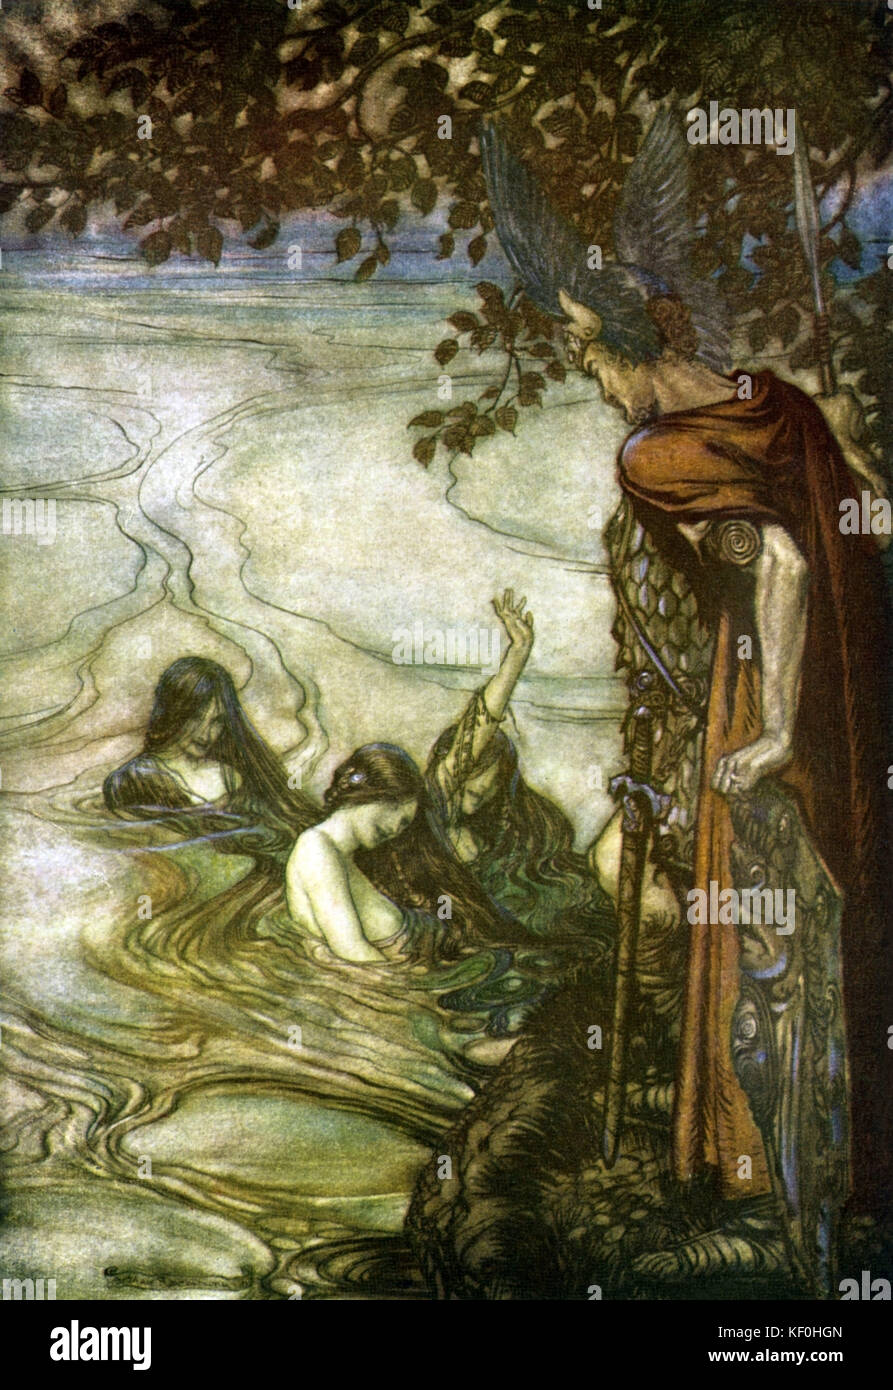 The Twilight of the Gods / Göttterdämmerung by Richard Wagner. The Rhine maidens plead with Siegfried to return the Ring to them.  Illustration by Arthur Rackham 1867 - 1939.  Caption:  'Though gaily ye may laugh, in grief ye shall be left, for, mocking maids, this ring ye ask shall never be yours' Act 3.  From 'The Ring Cycle' / 'Der Ring des Nibelungen'.  RW German composer & author, 22 May 1813 - 13 February 1883. Stock Photo